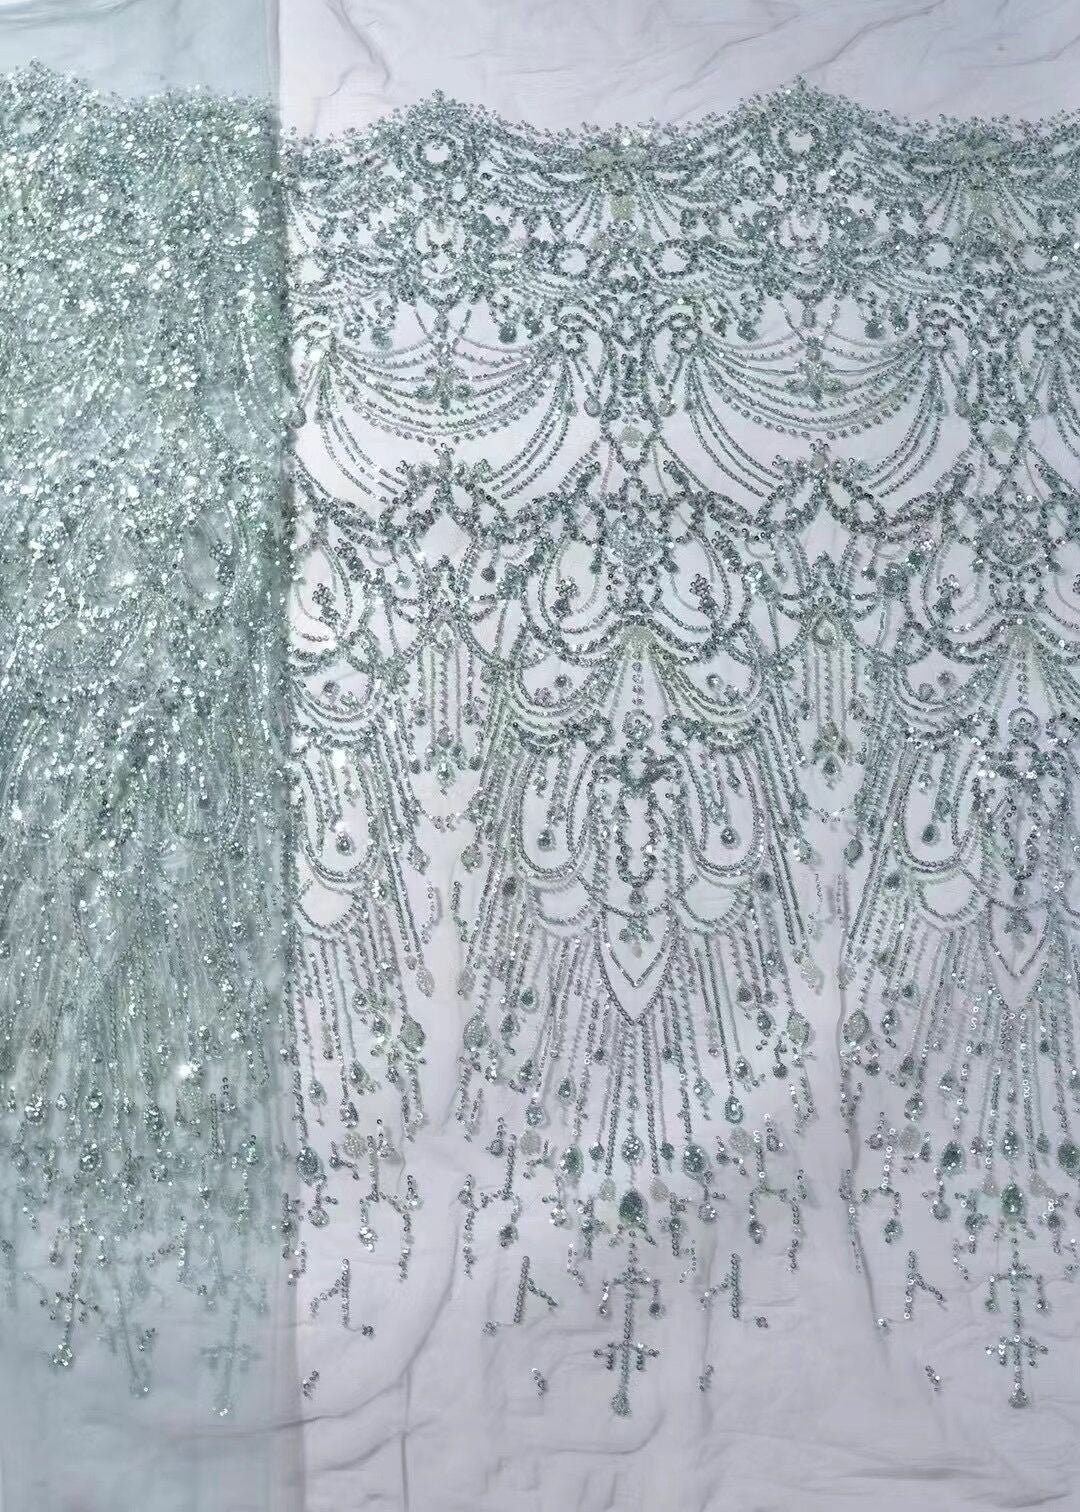 5 YARDS / 12 COLORS / Growing Vines Glitter Sequin Beaded Embroidery Tulle Mesh Lace Fabric - Classic Modern Fabrics